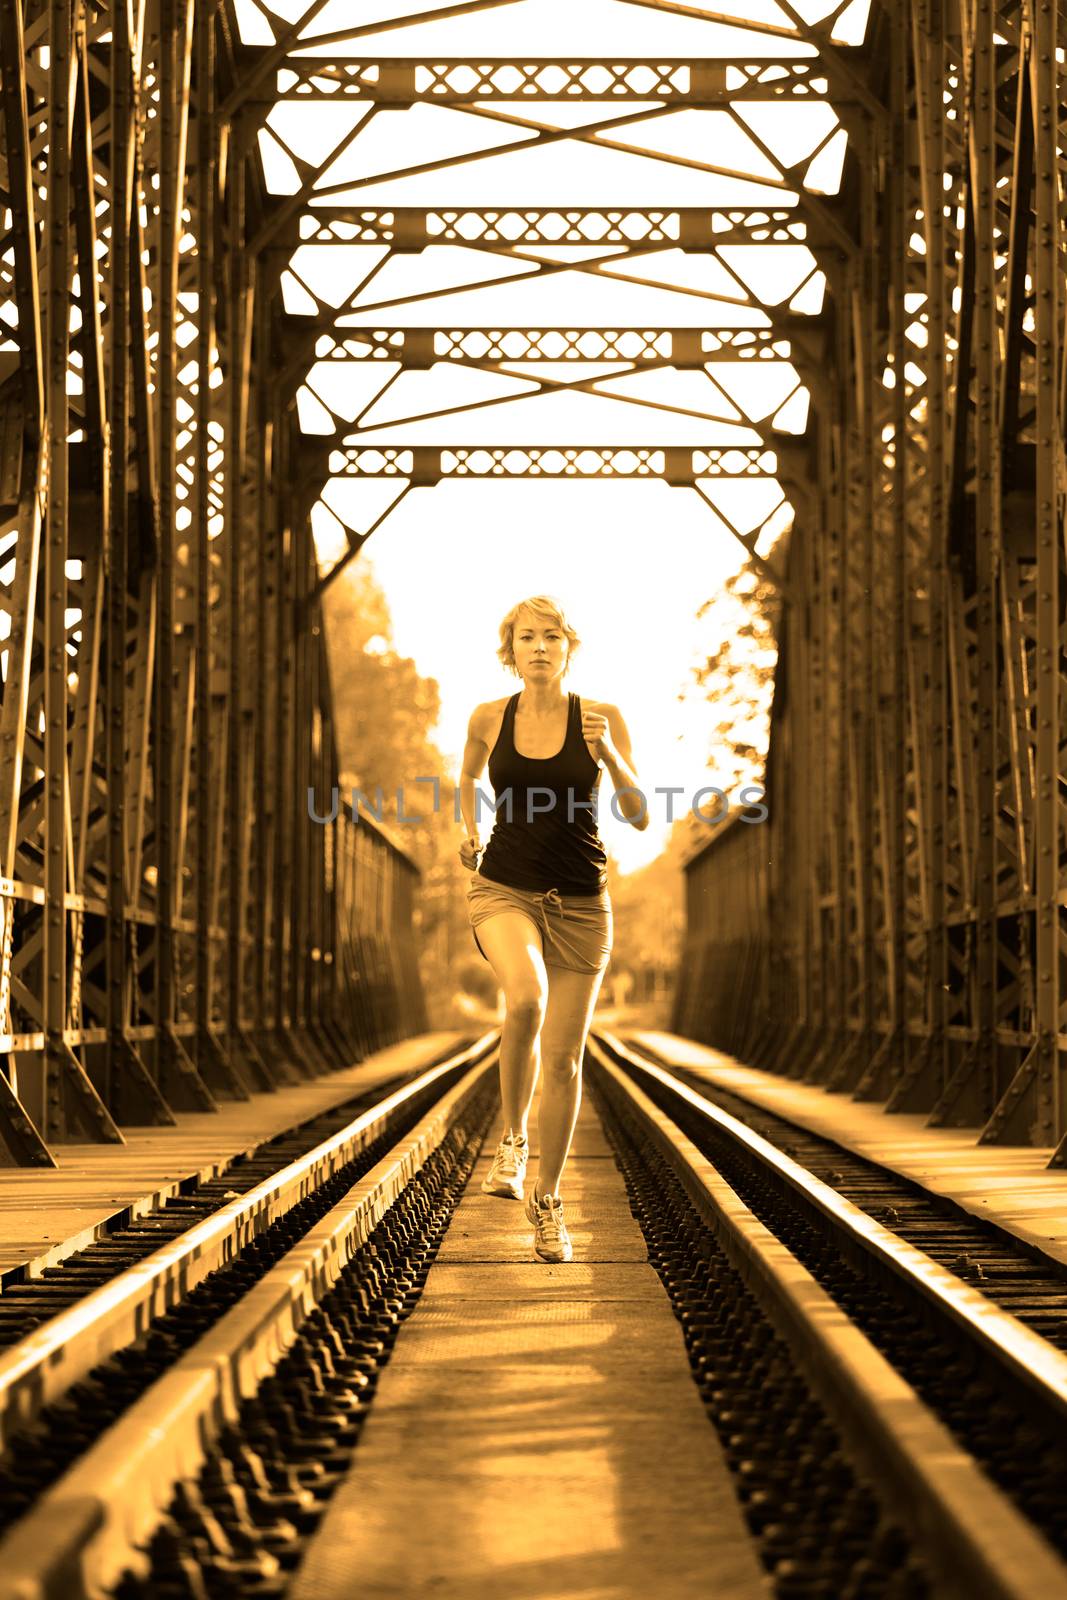 Athlete running on railaway tracks bridge in morning sunrise training for marathon and fitness. Healthy sporty caucasian woman exercising in urban environment. Active urban lifestyle.